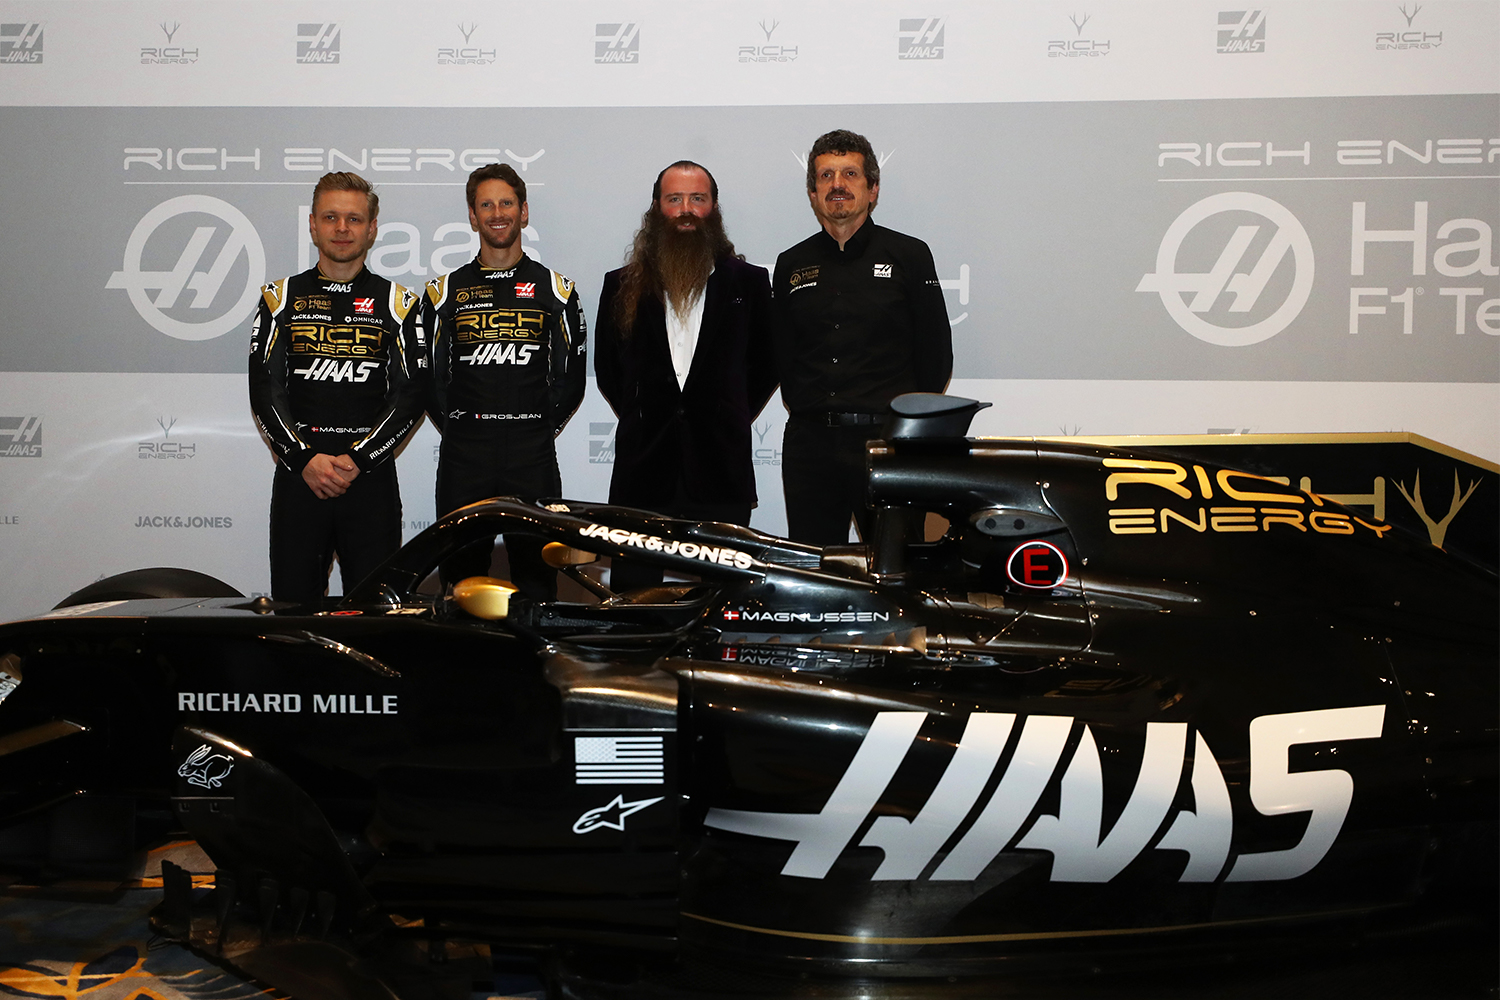 (L-R) Haas drivers Kevin Magnussen and Romain Grosjean, Rich Energy CEO William Storey and Haas Team Principal Guenther Steiner in February 2019.